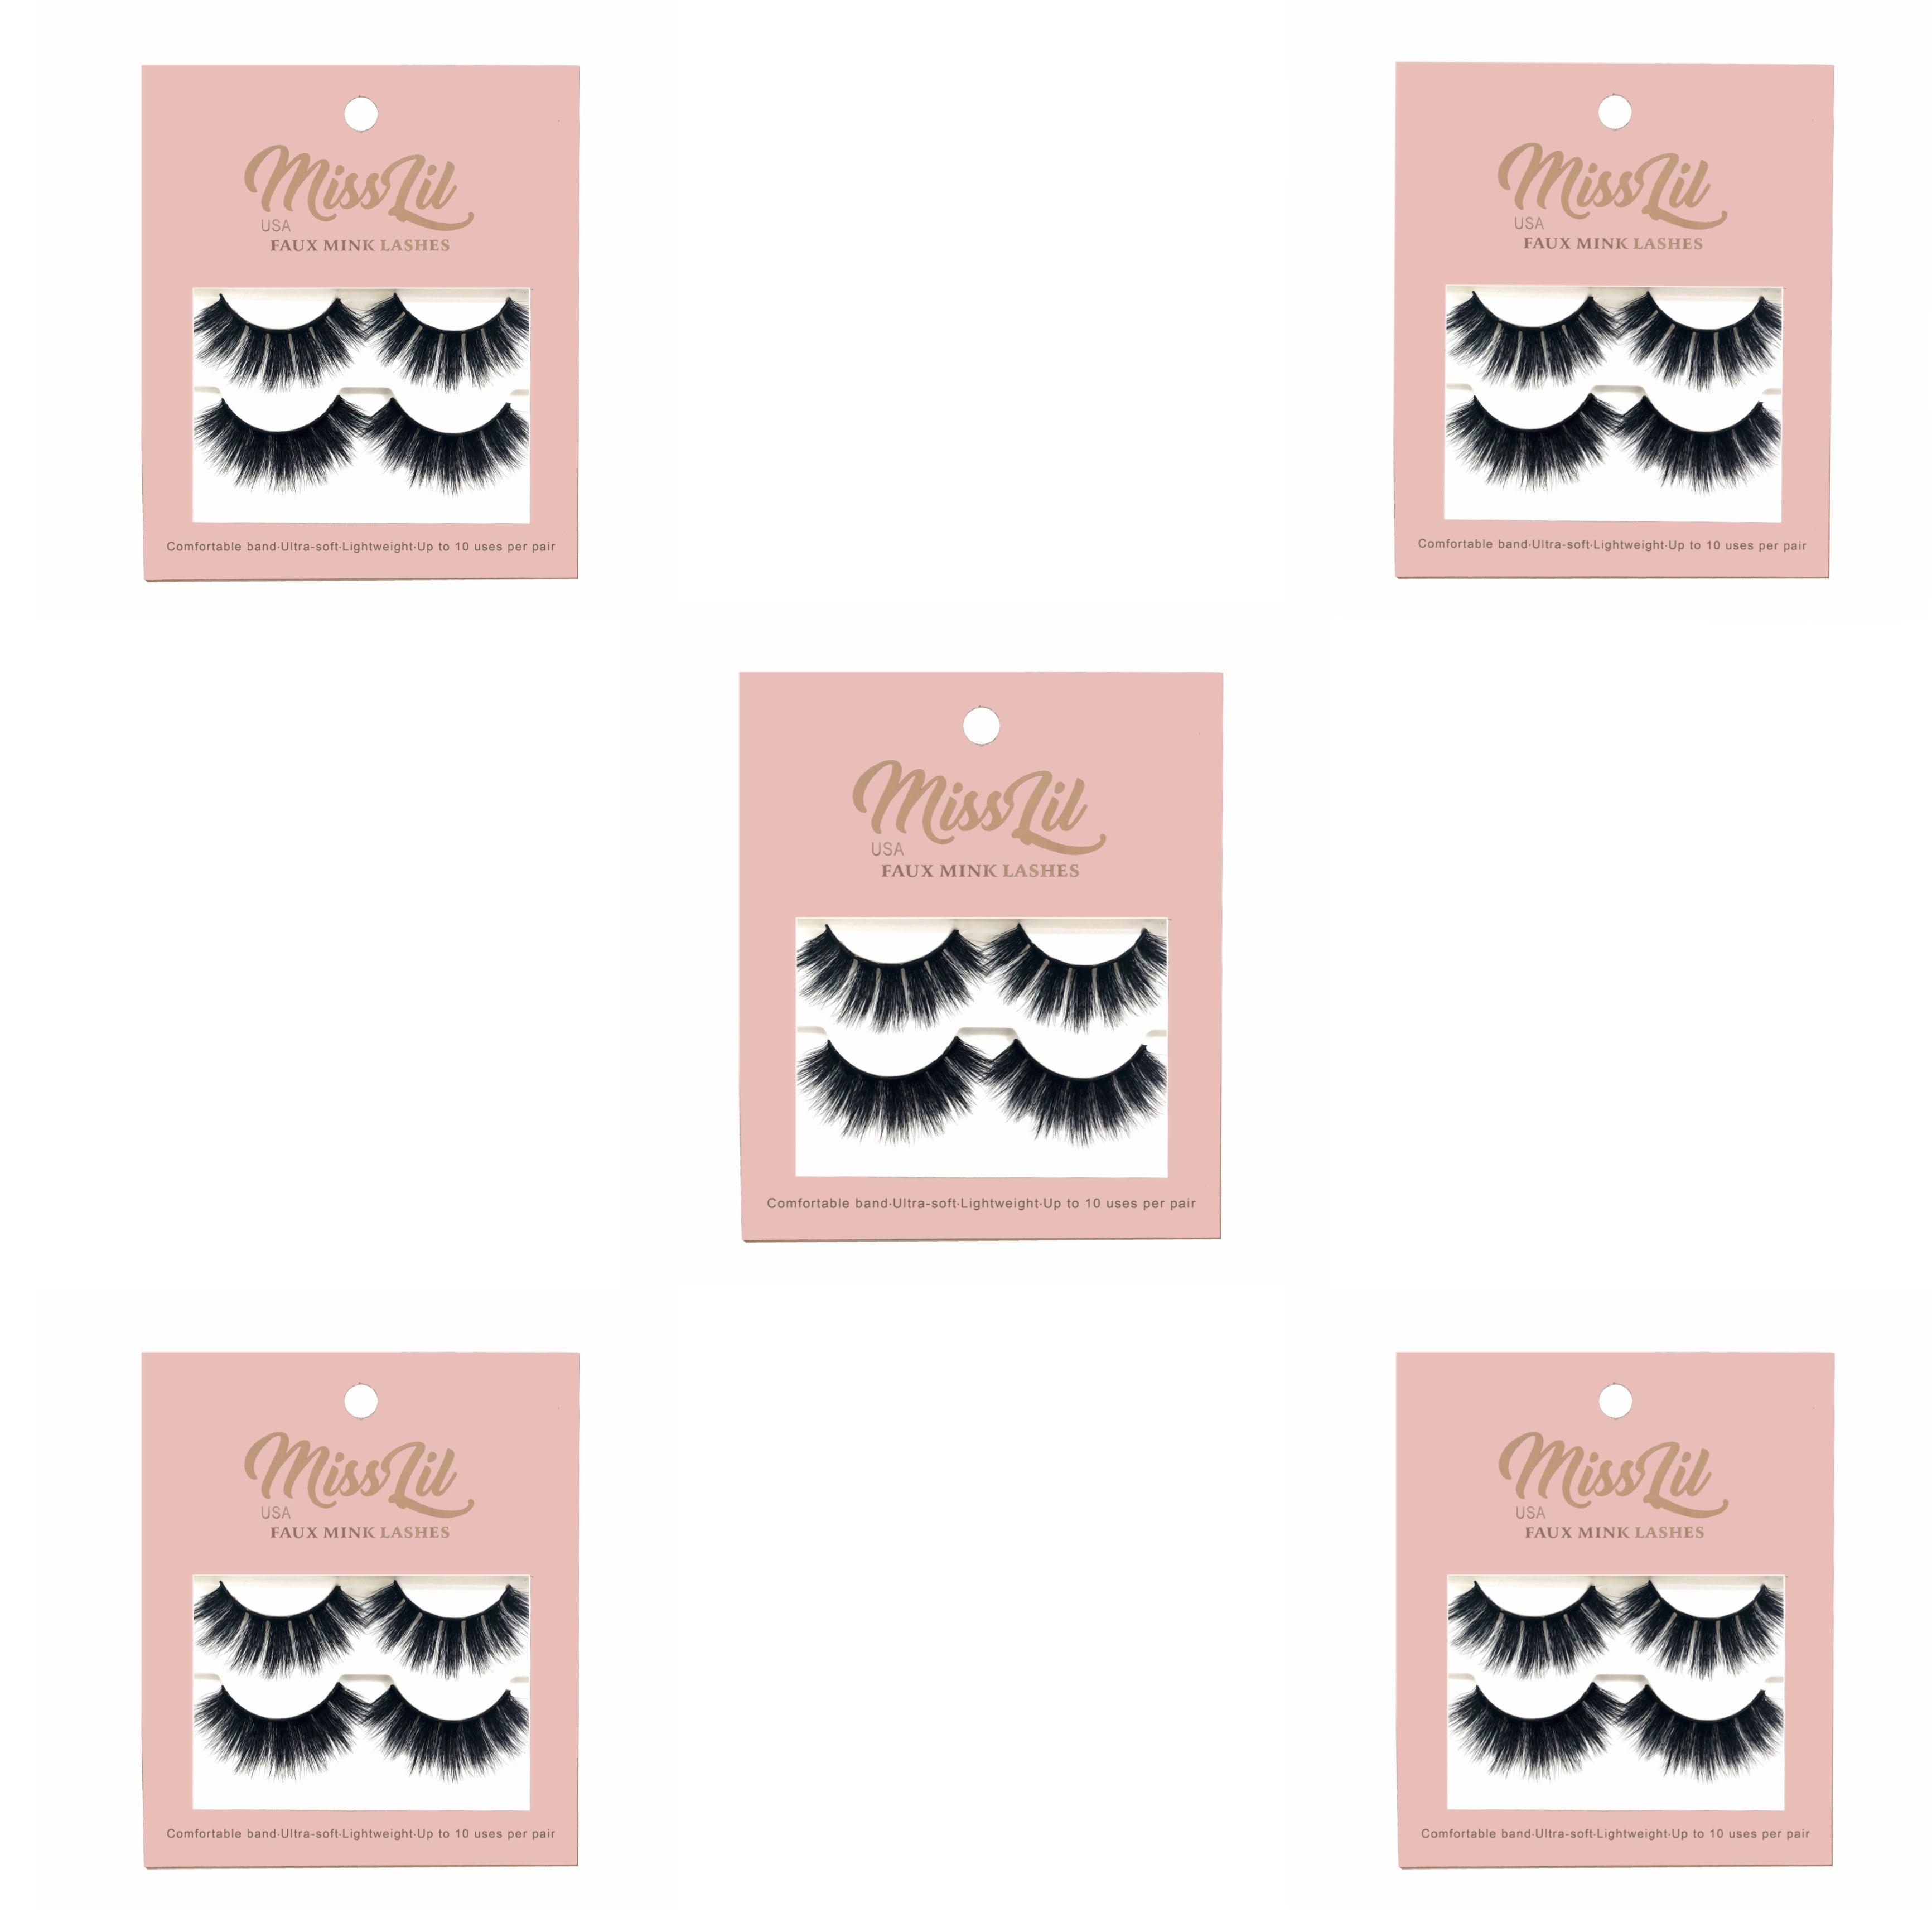 Miss Lil USA Lashes (5 Boxes) #4 - Miss Lil USA